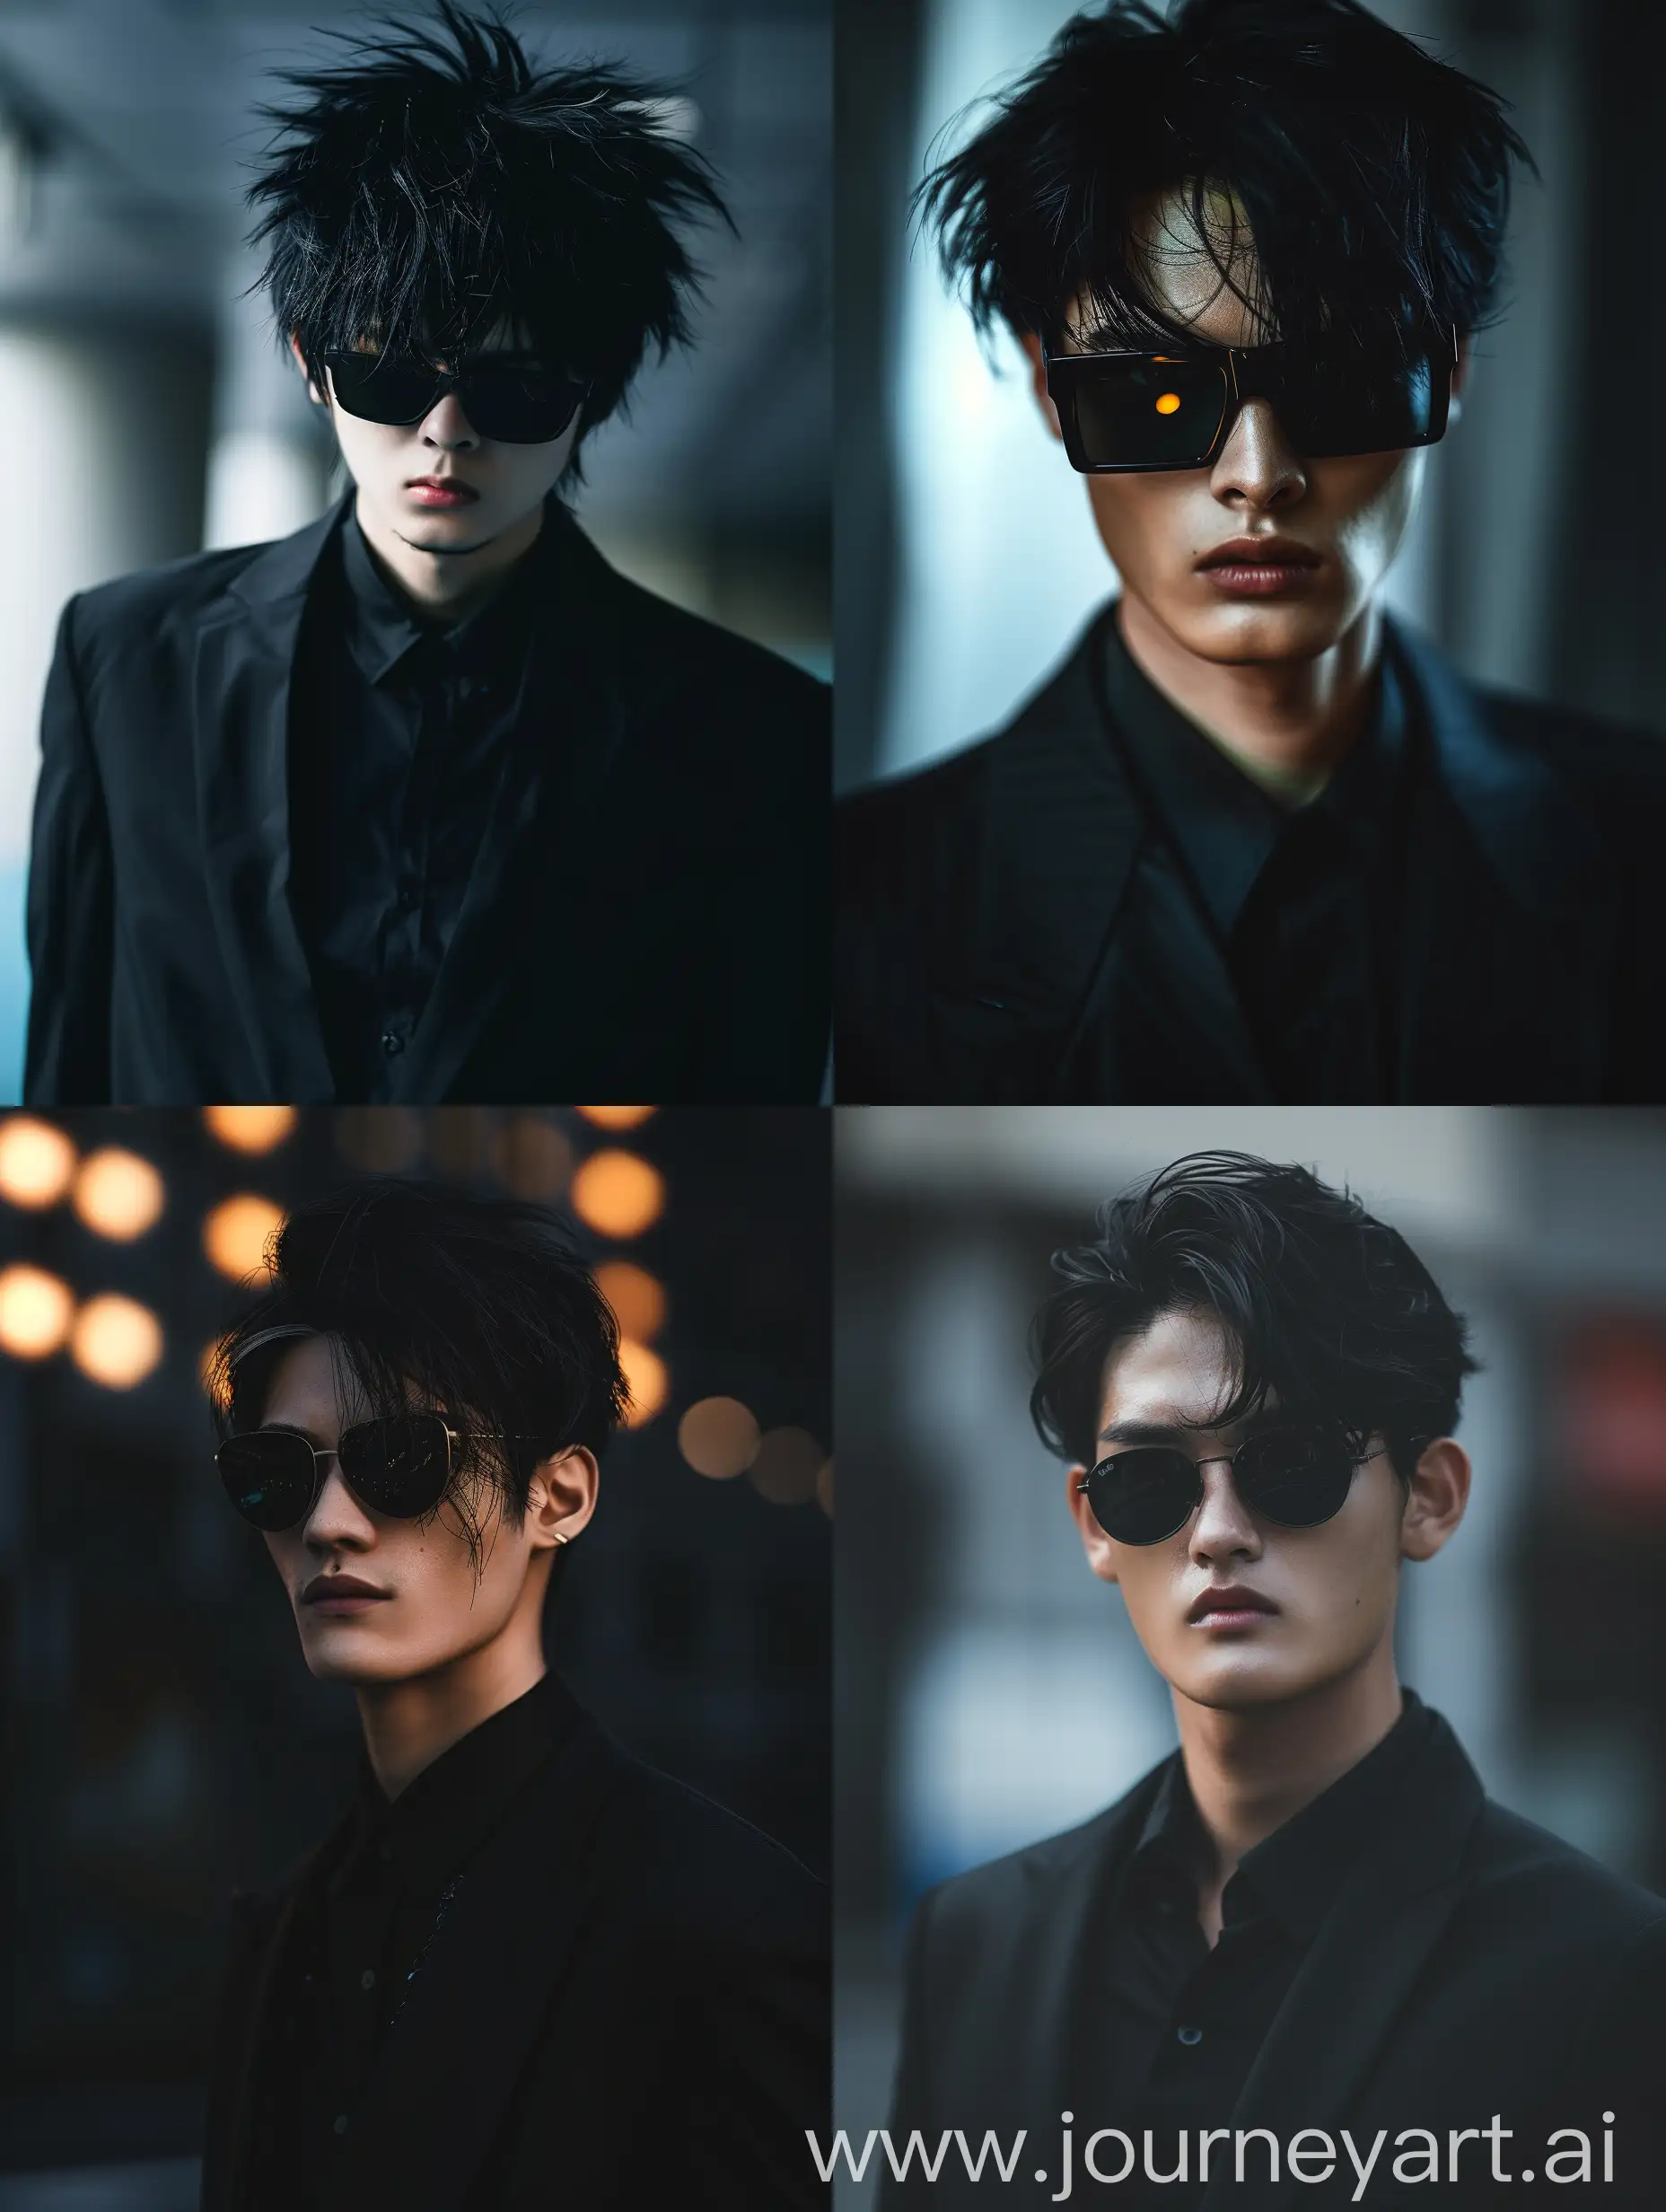 Stylish-Anime-Portrait-Handsome-Man-in-Black-Suit-and-Sunglasses